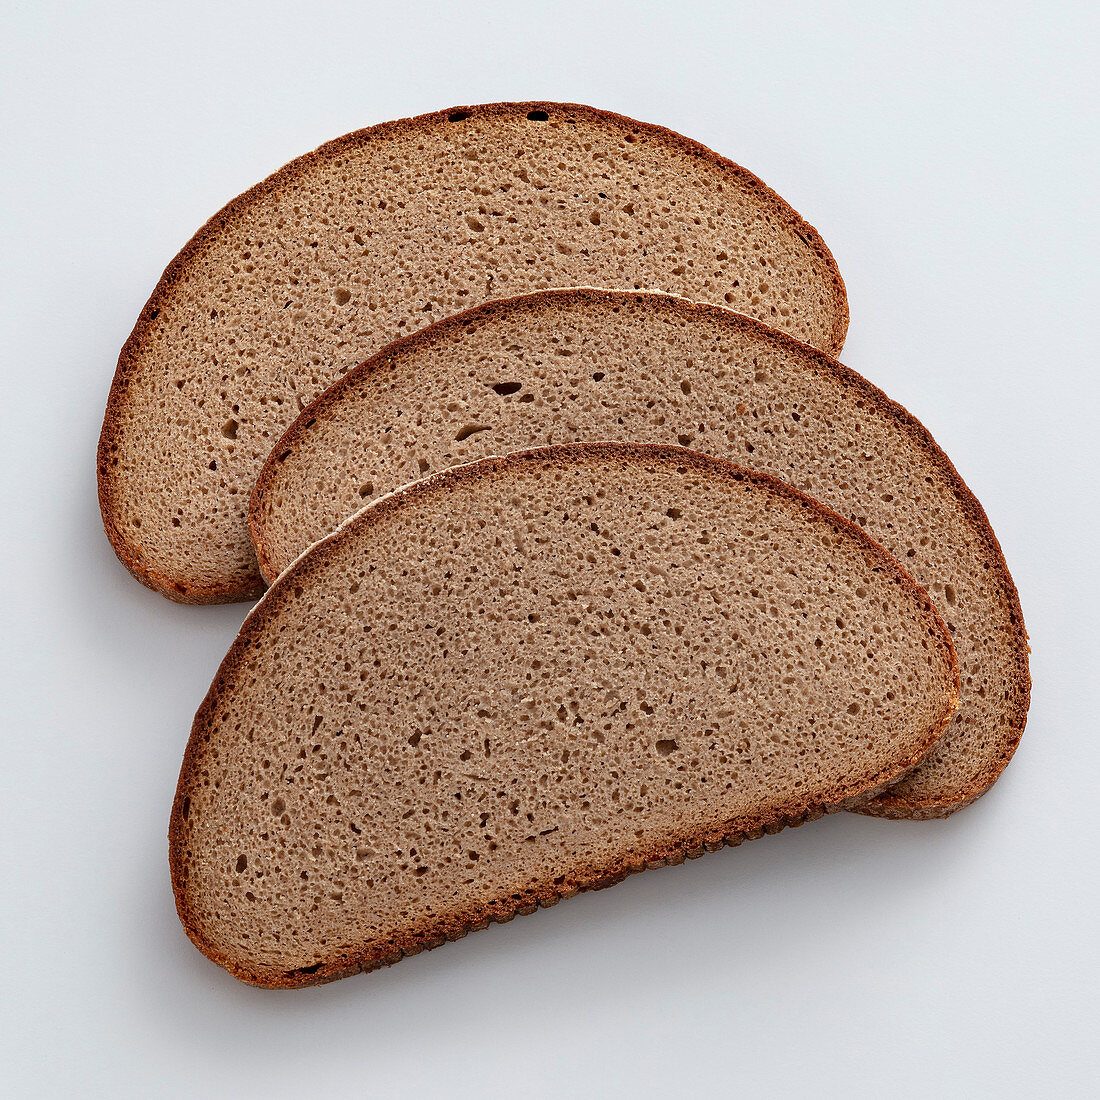 Three slices of rye bread on a white surface